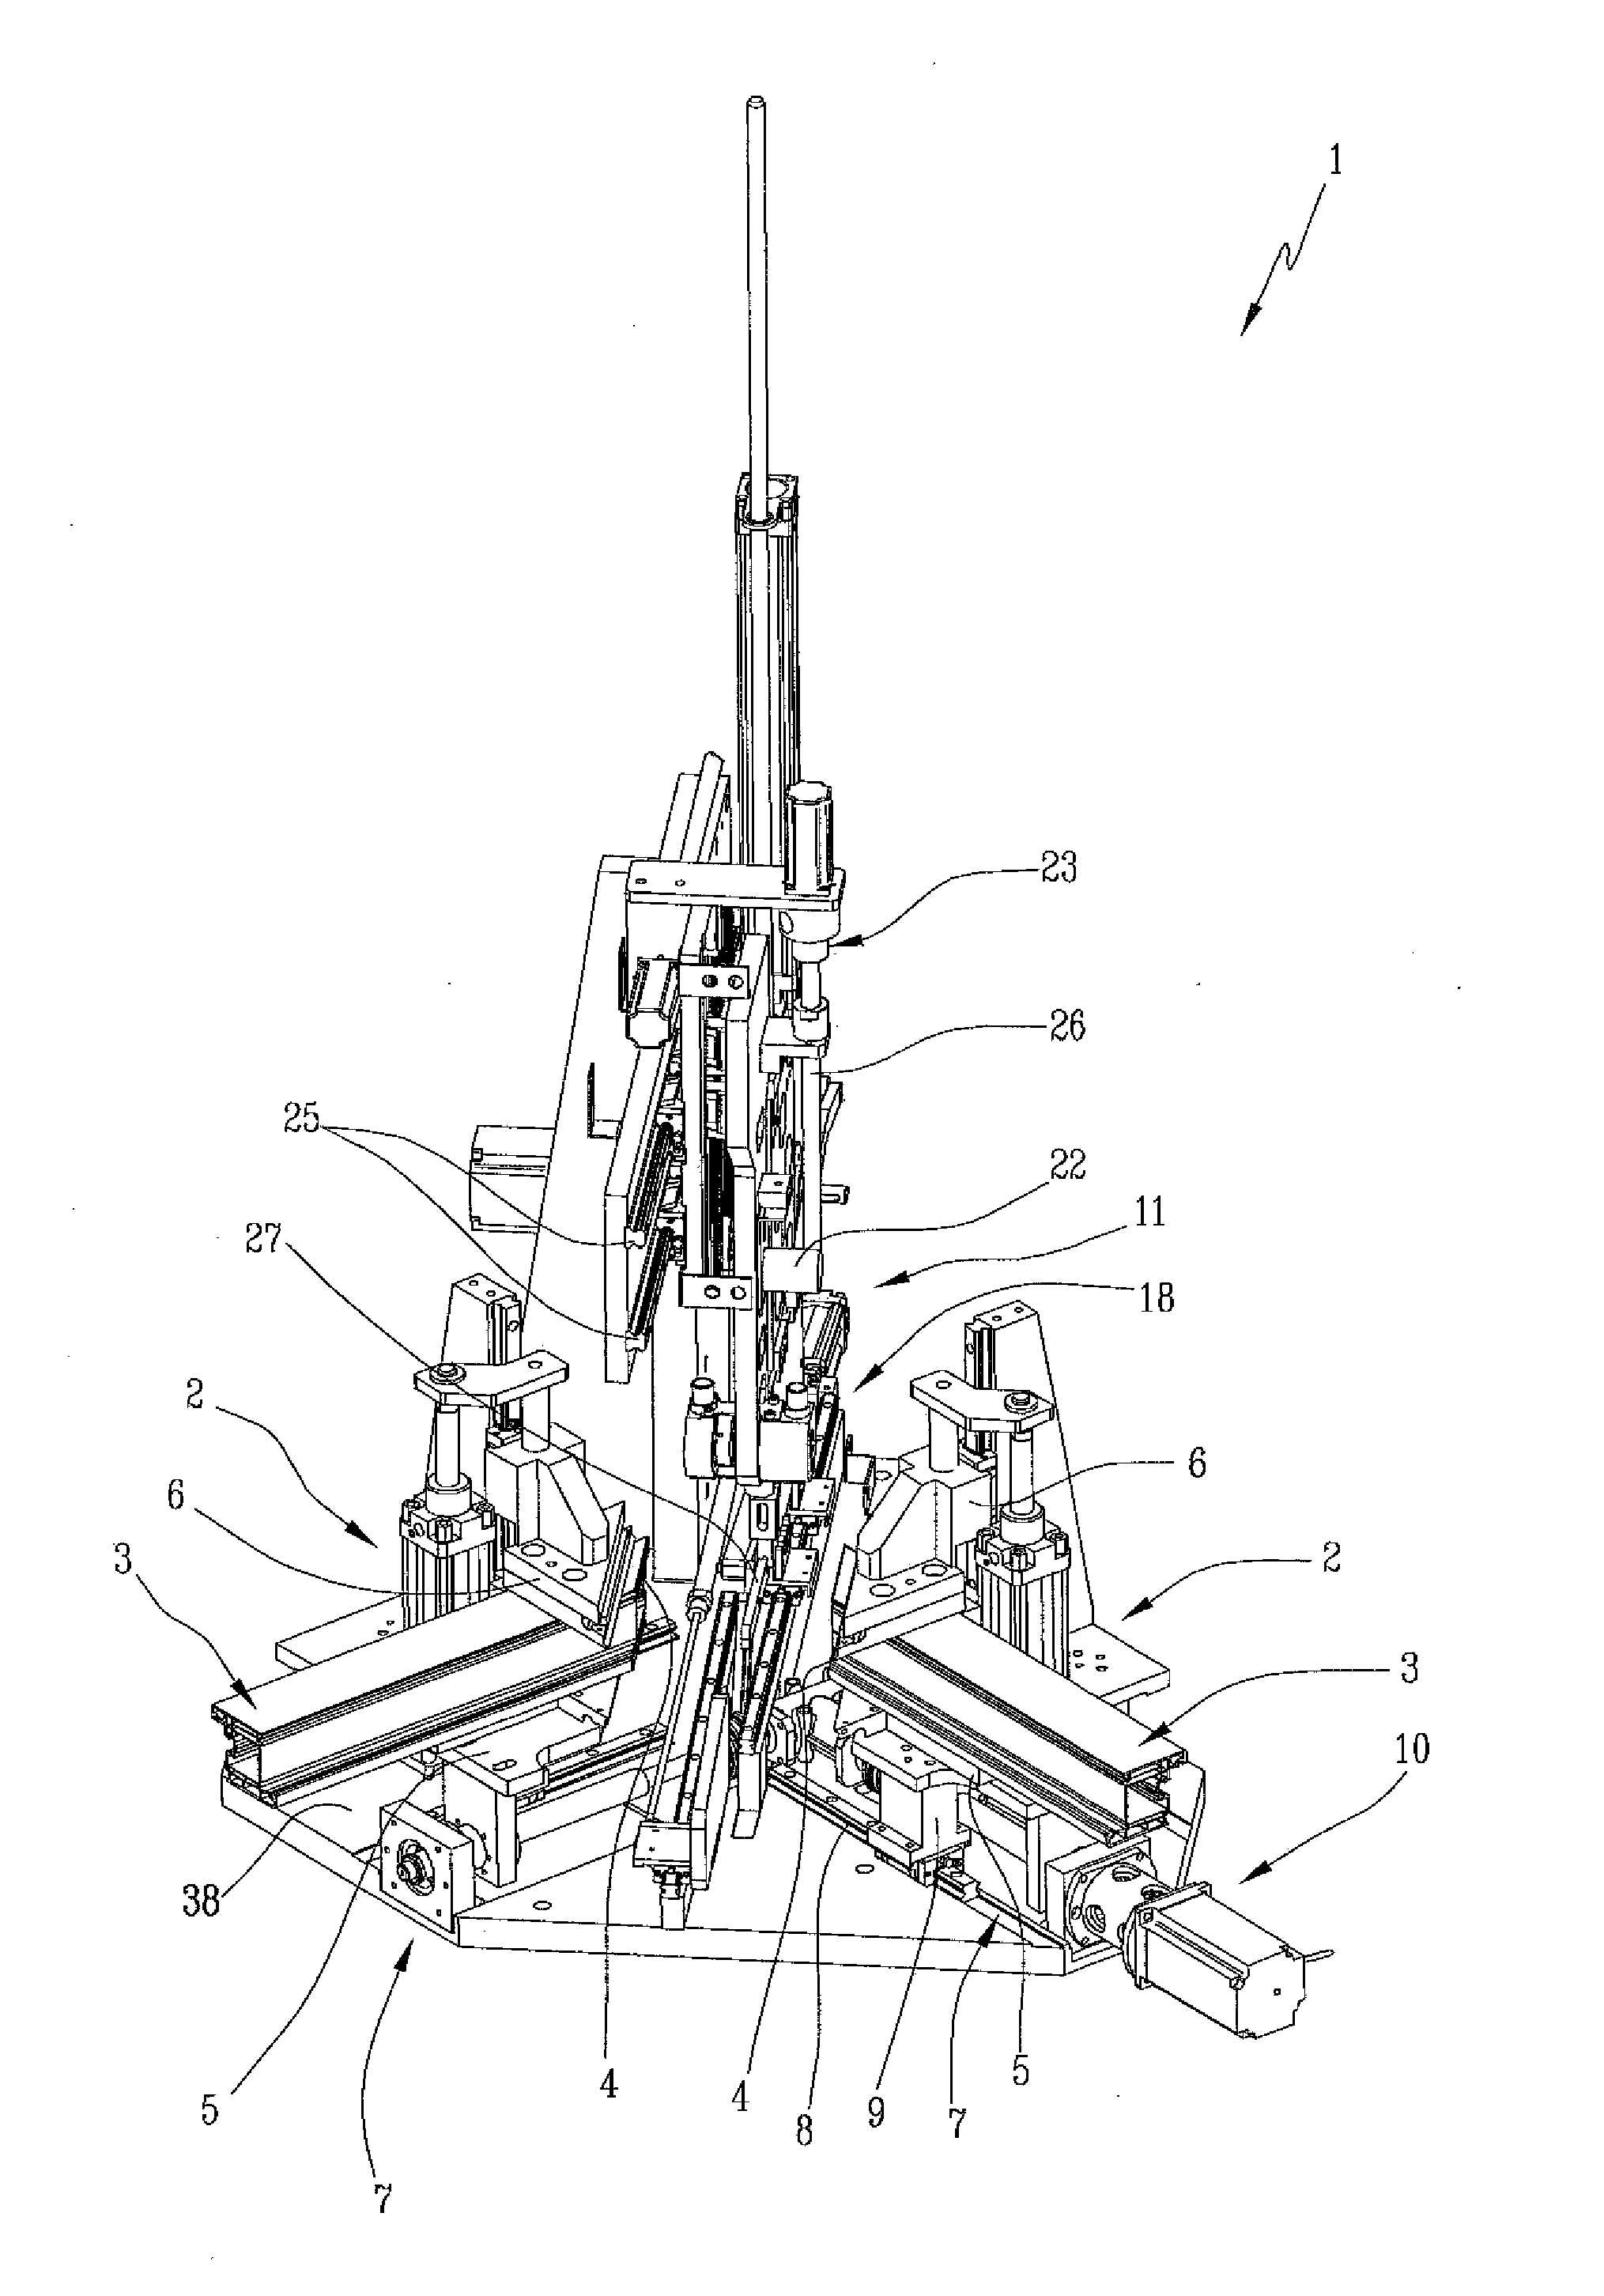 Method and device for welding profiled elements in plastic material, in particular PVC